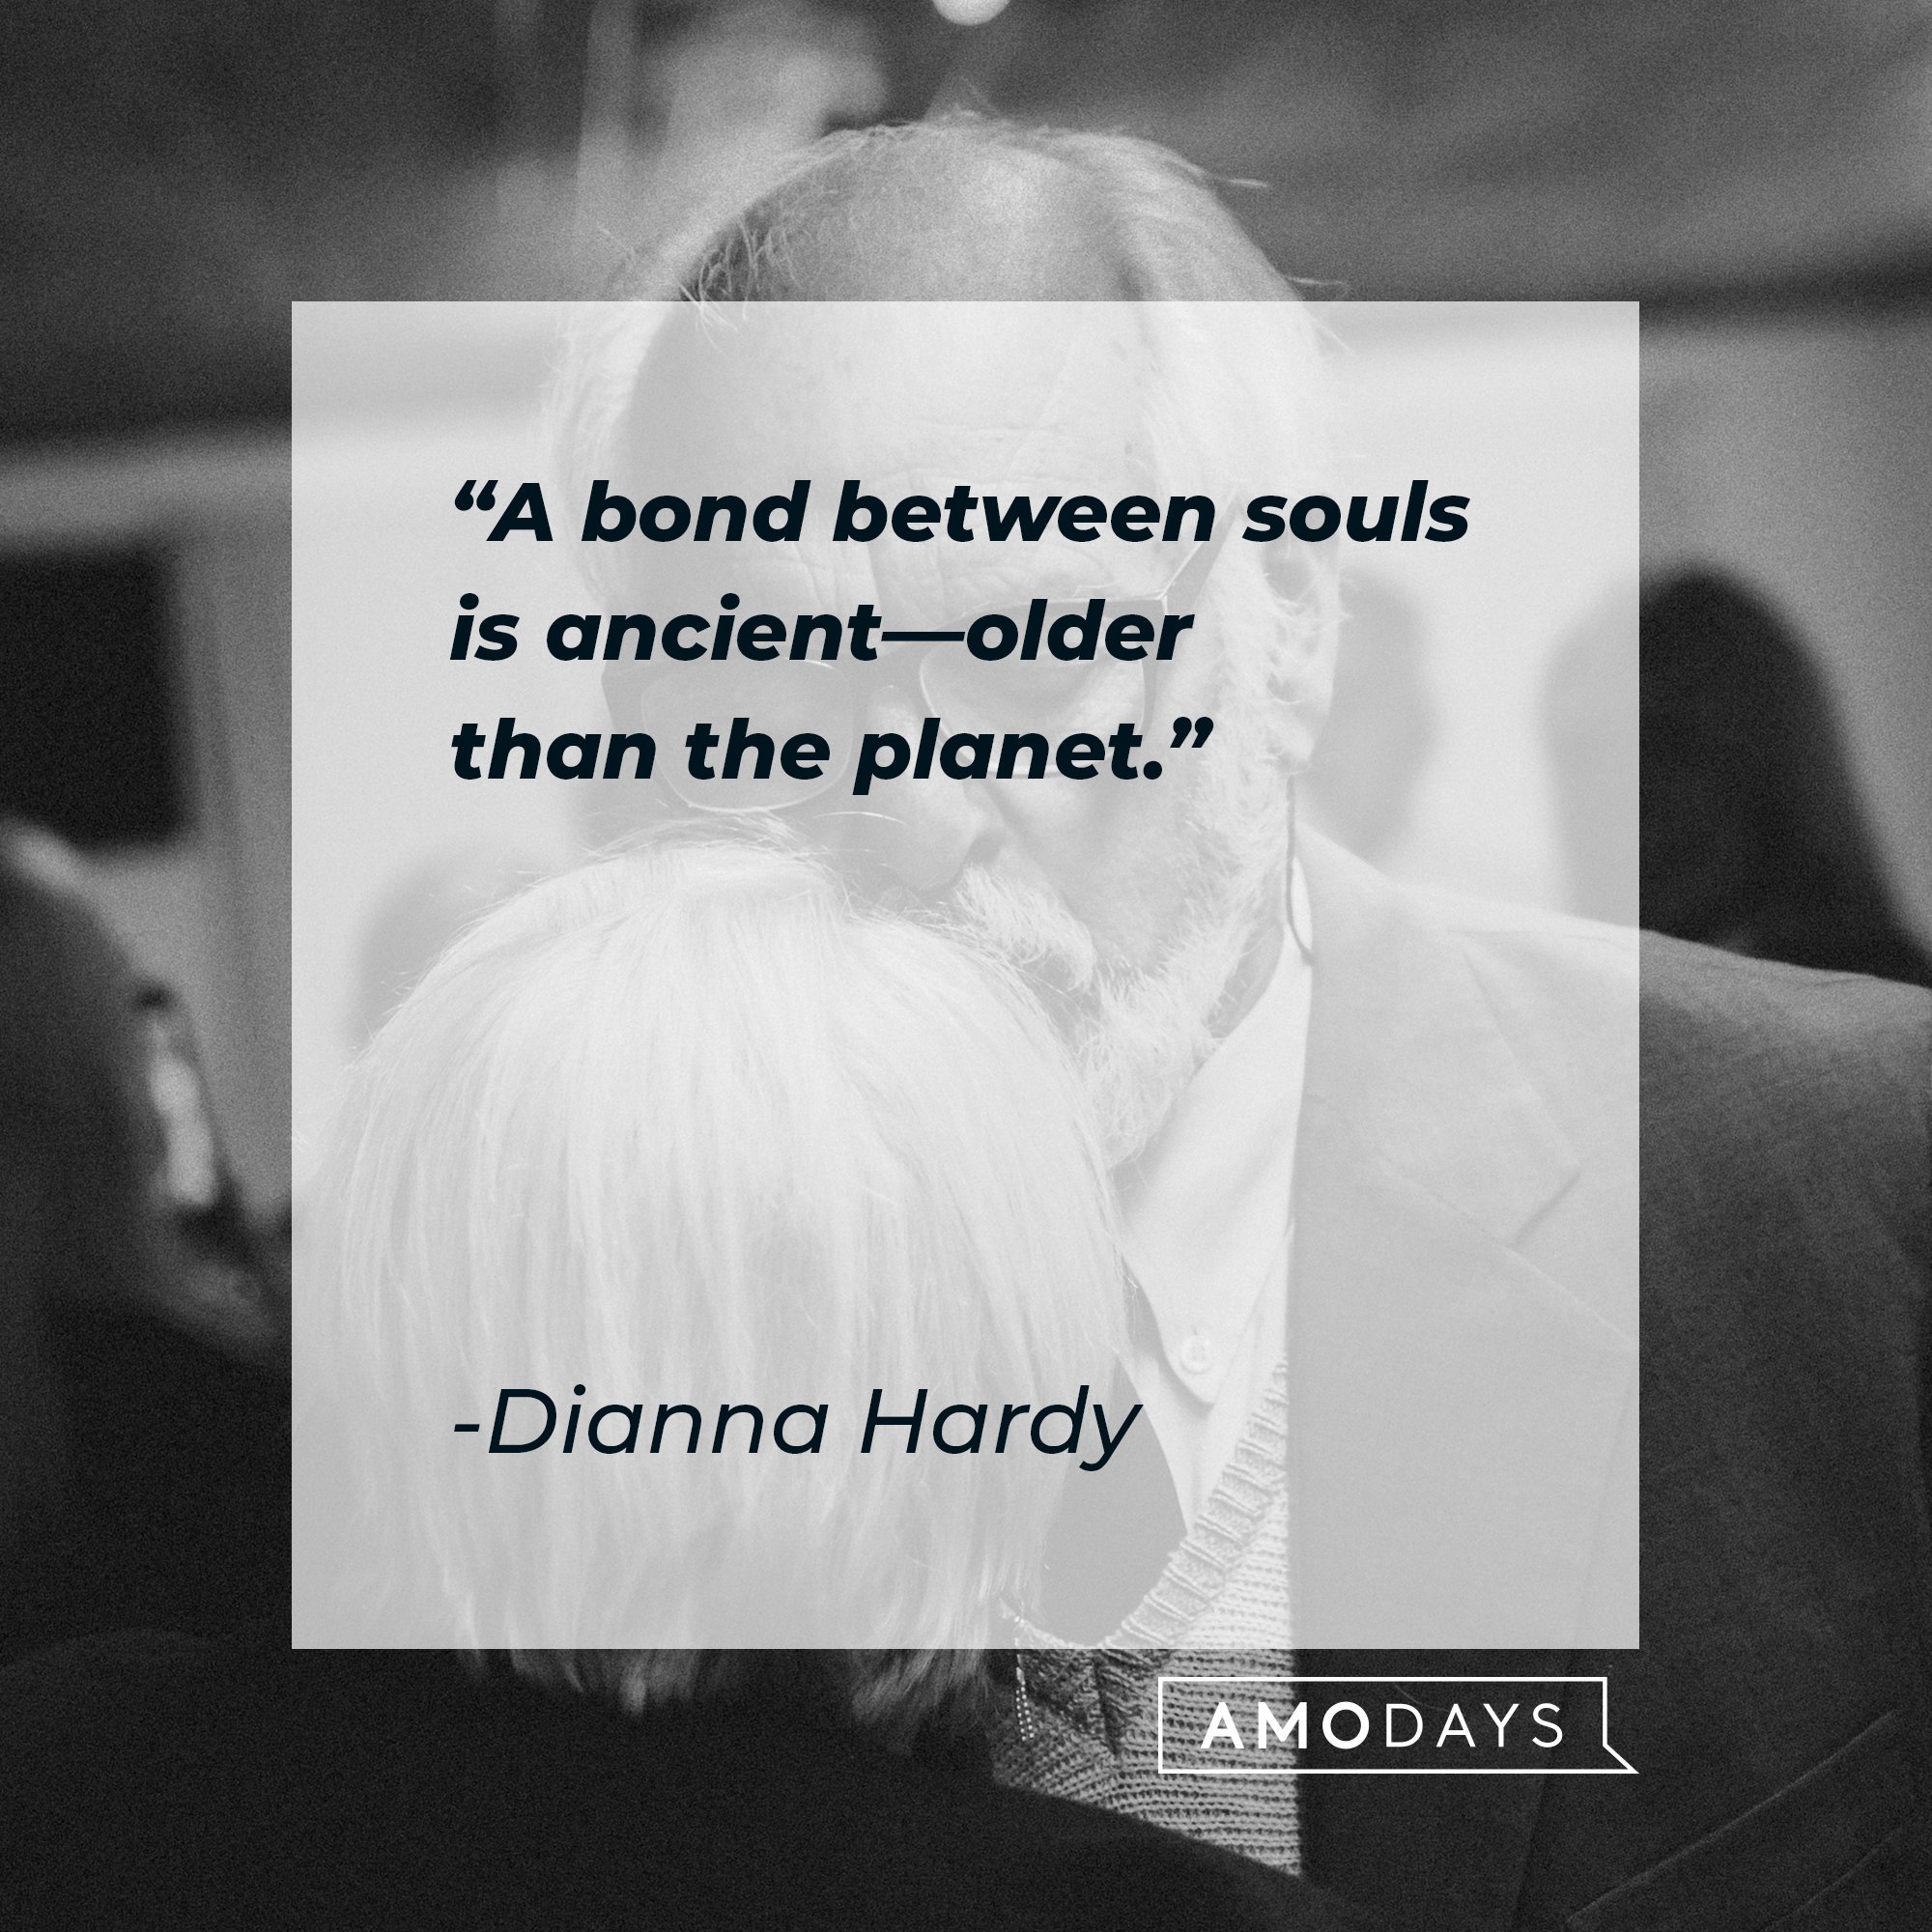 Dianna Hardy’s quote: "A bond between souls is ancient—older than the planet." | Image: AmoDays